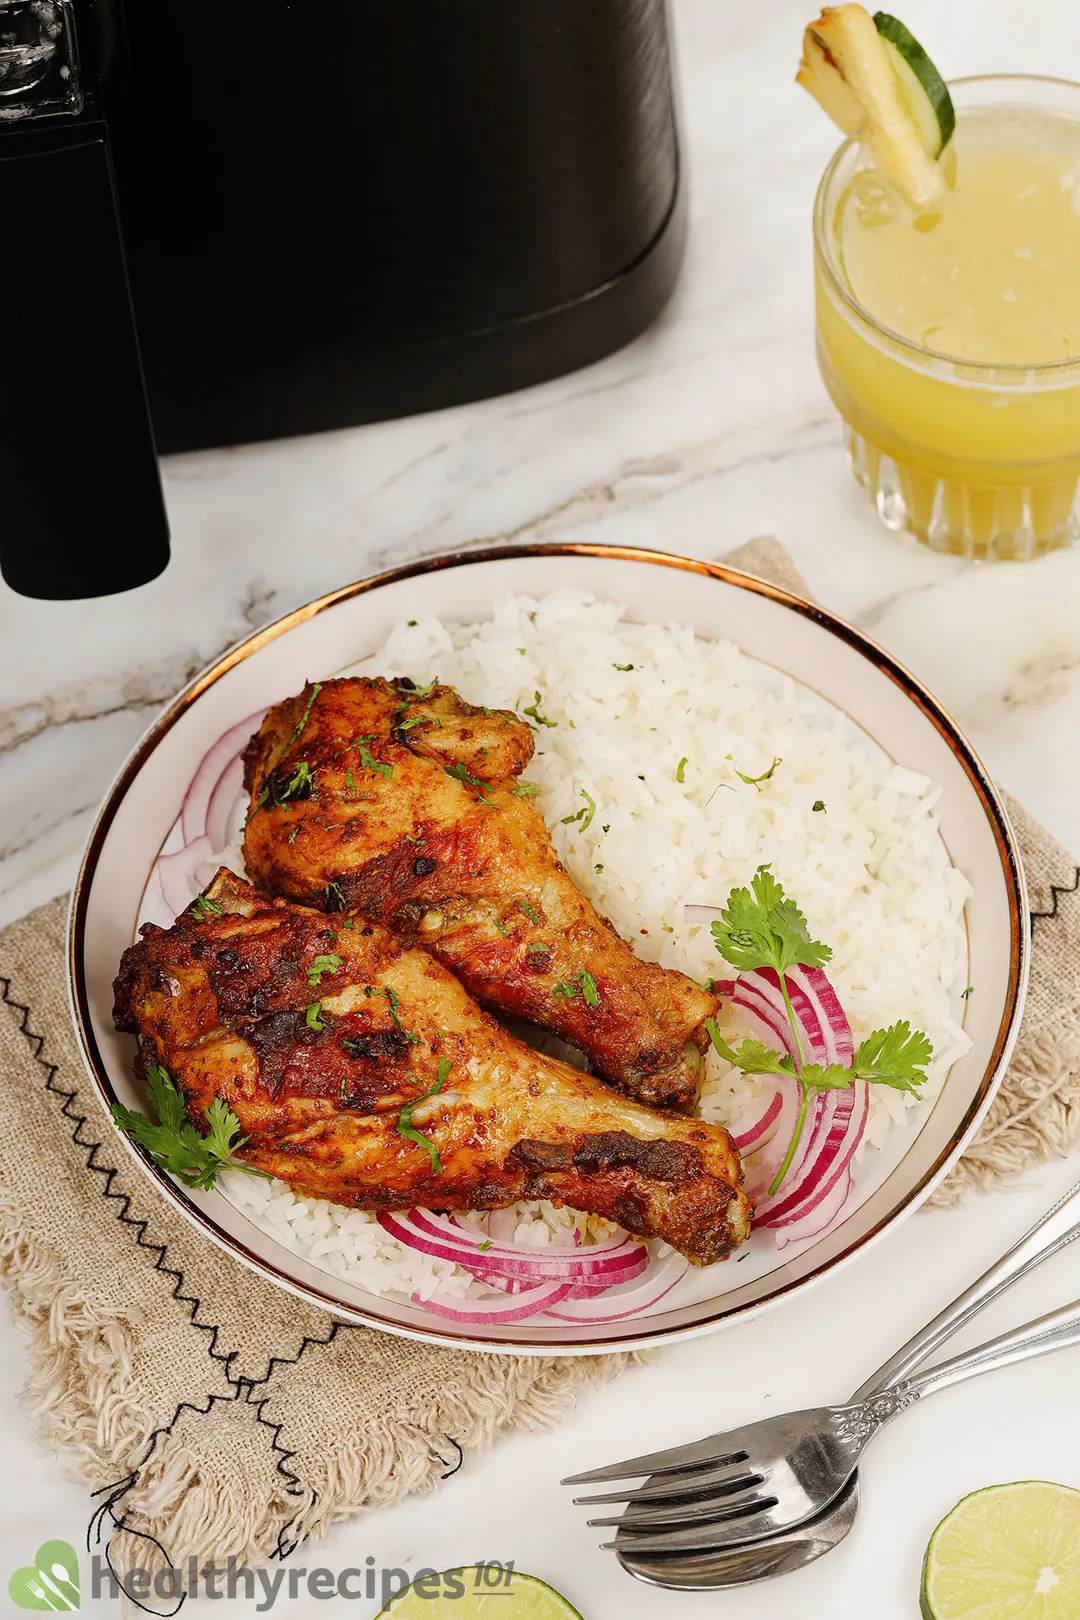 two chicken drumsticks bed on rice and slices onion on a plate decorated with a glass of juice and a spoon, a fork next to an air fryer